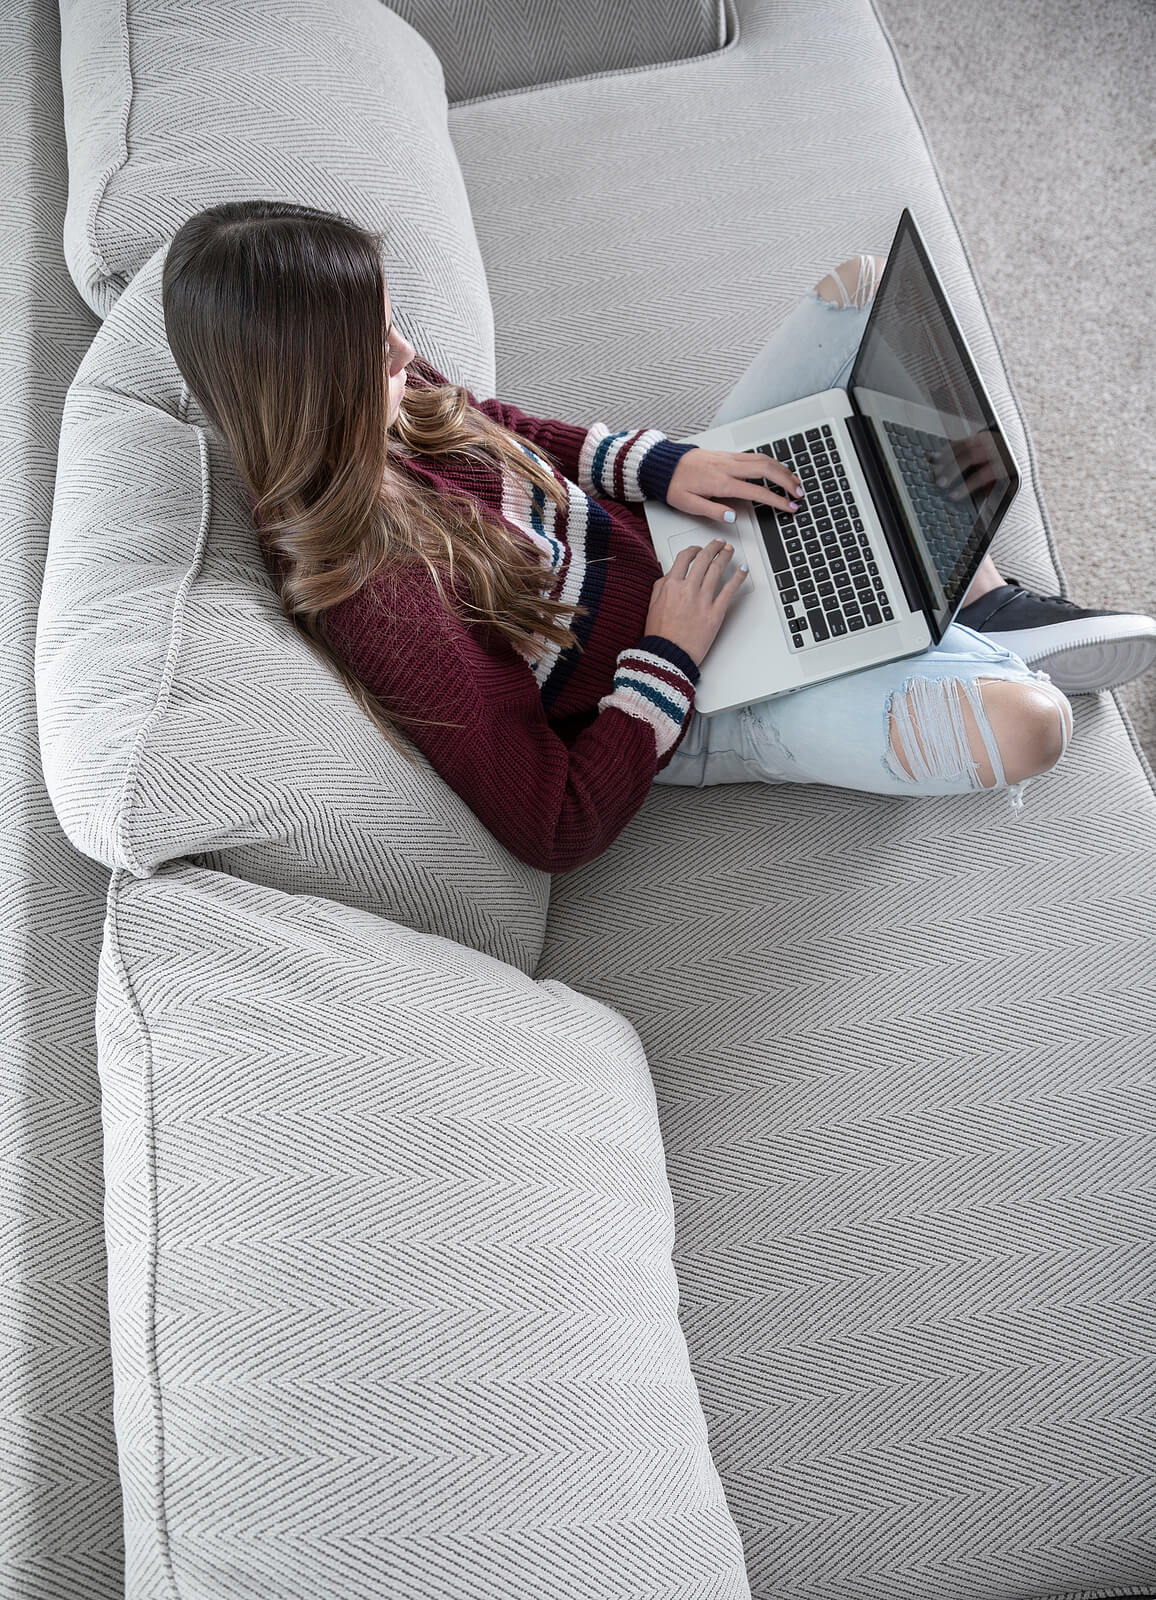 A woman sits on a couch while on her laptop. Looking to understand existential angst? Speak with a depth therapist in Texas and start depth therapy today!